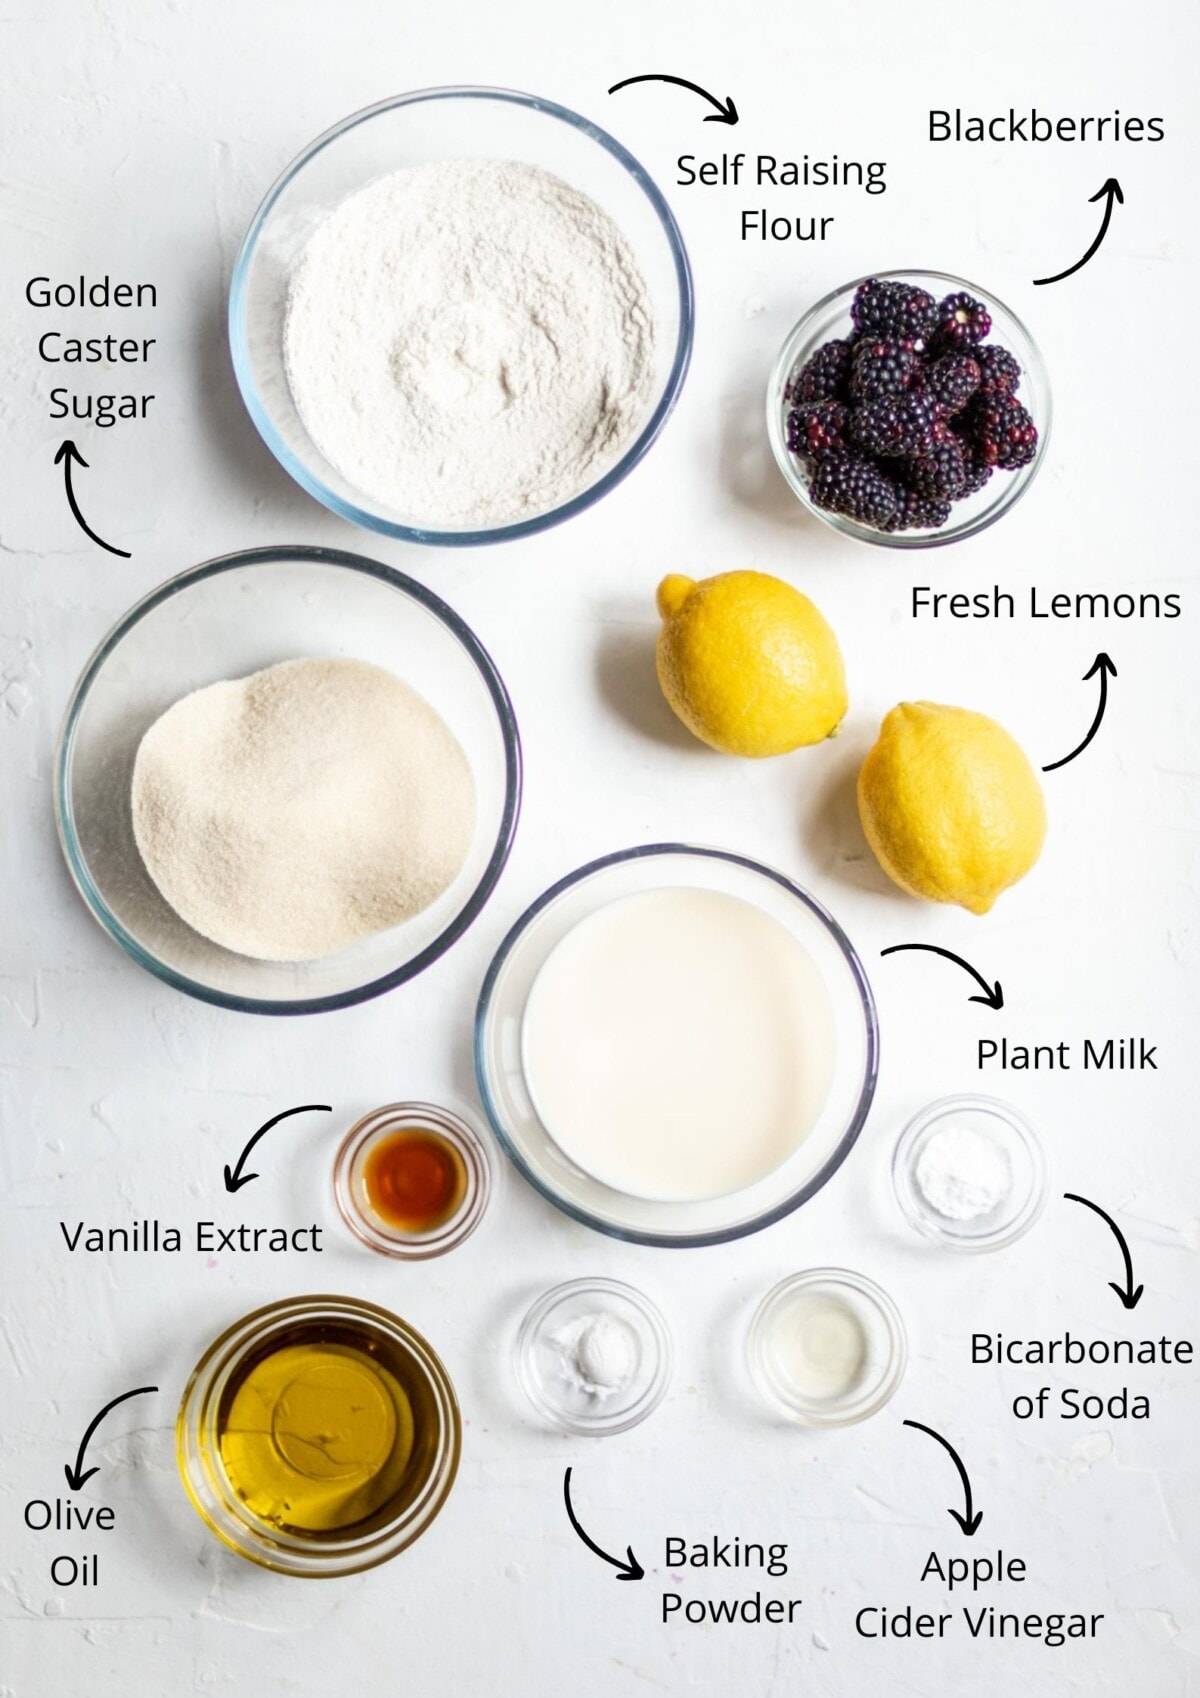 Lemon and blackberry cake ingredients on a white background with labels.